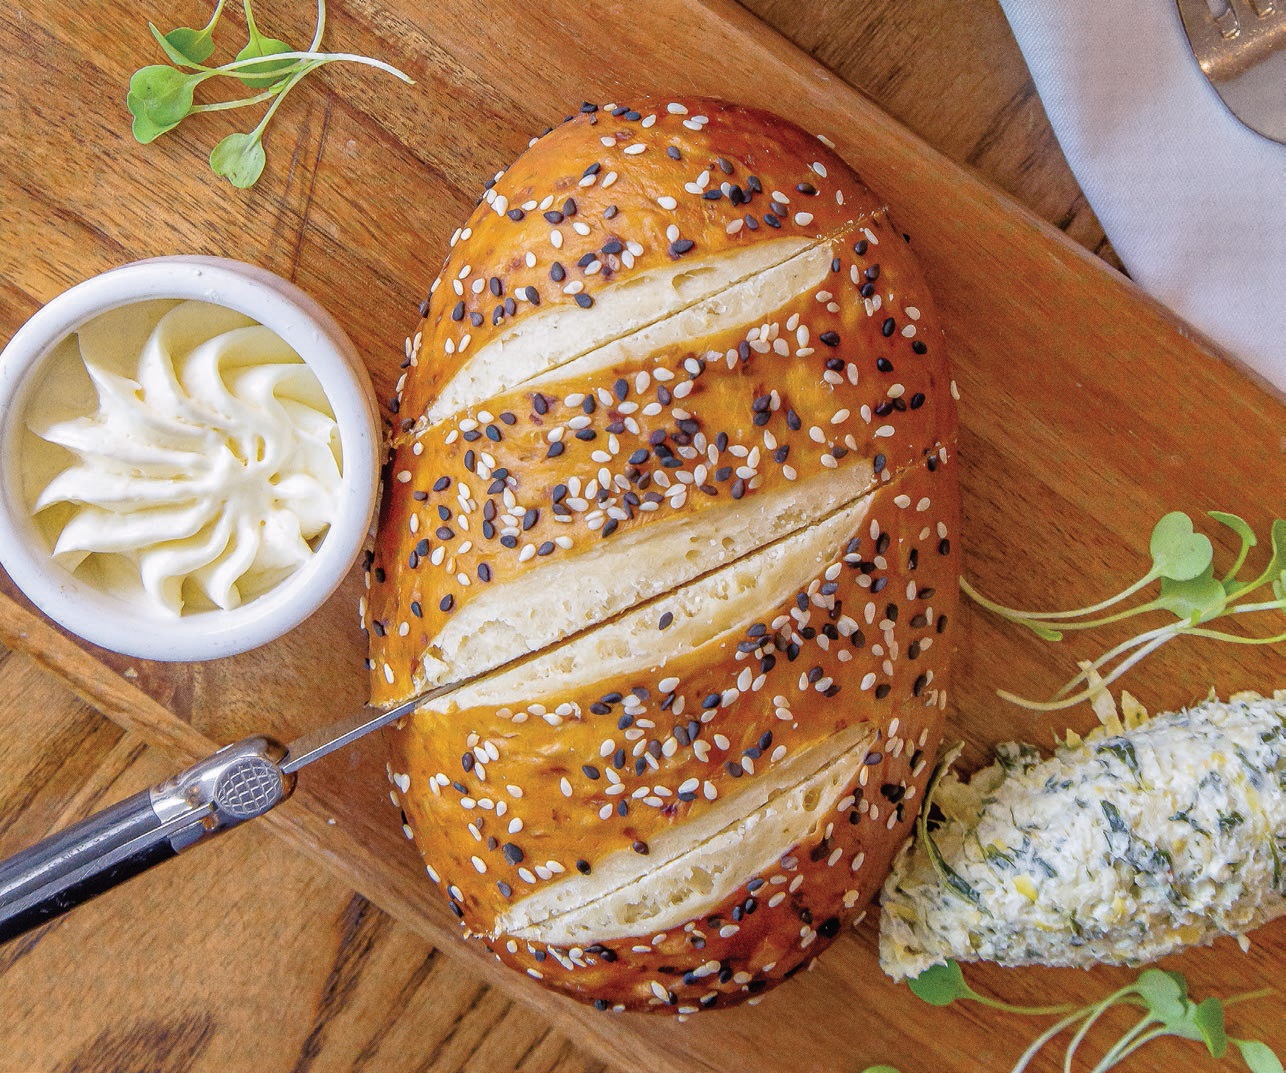 National Soft Pretzel Day will not be complete without a slice, or two, of White Dog Cafe’s housemade soft pretzel bread with spinach-artichoke spread and honey butter PHOTO BY: ALEXANDRA JADE TRINGALI